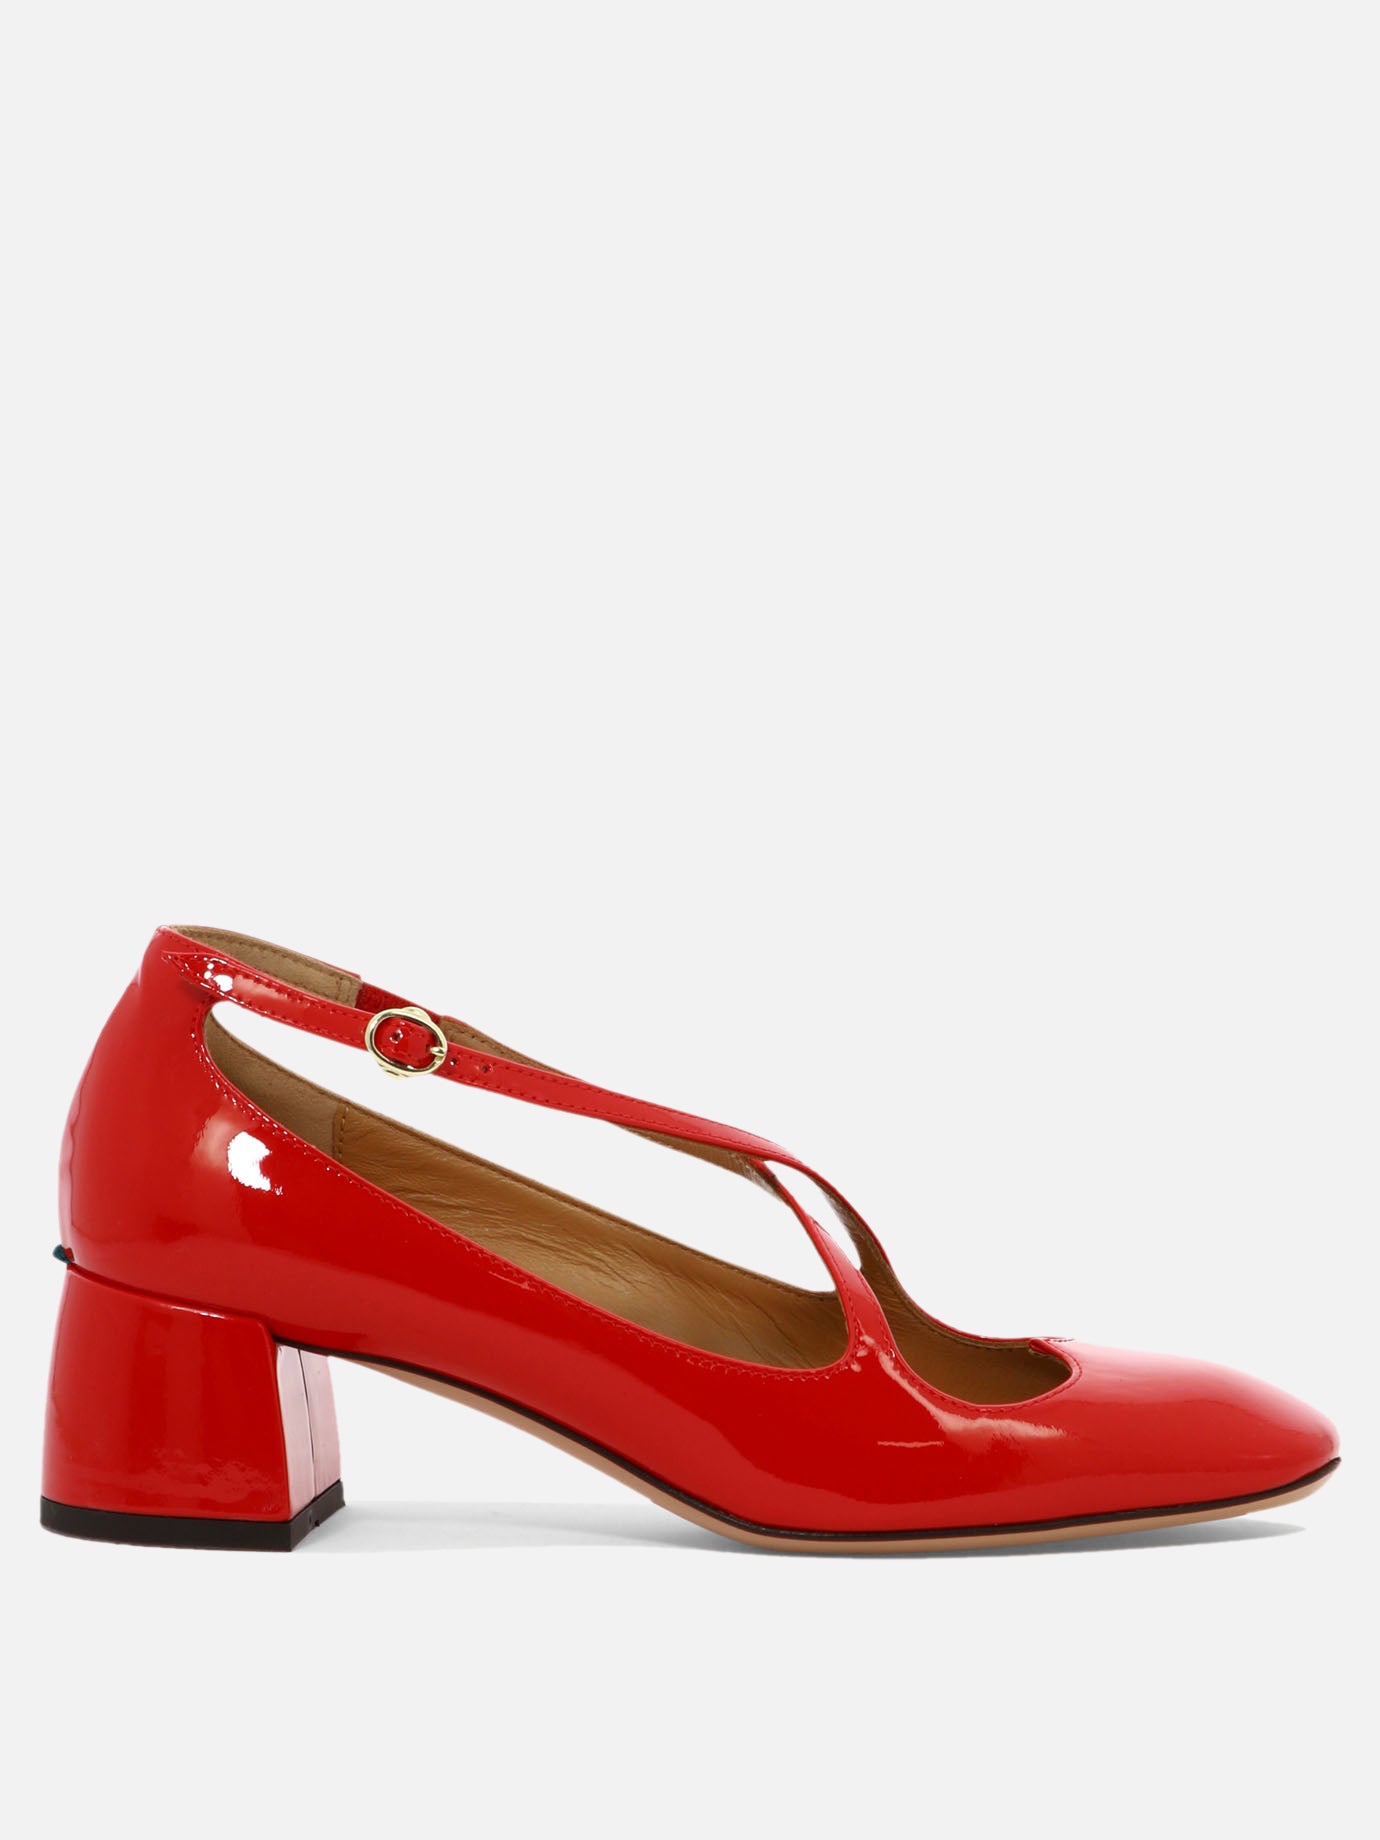 "Two For Love" pumps